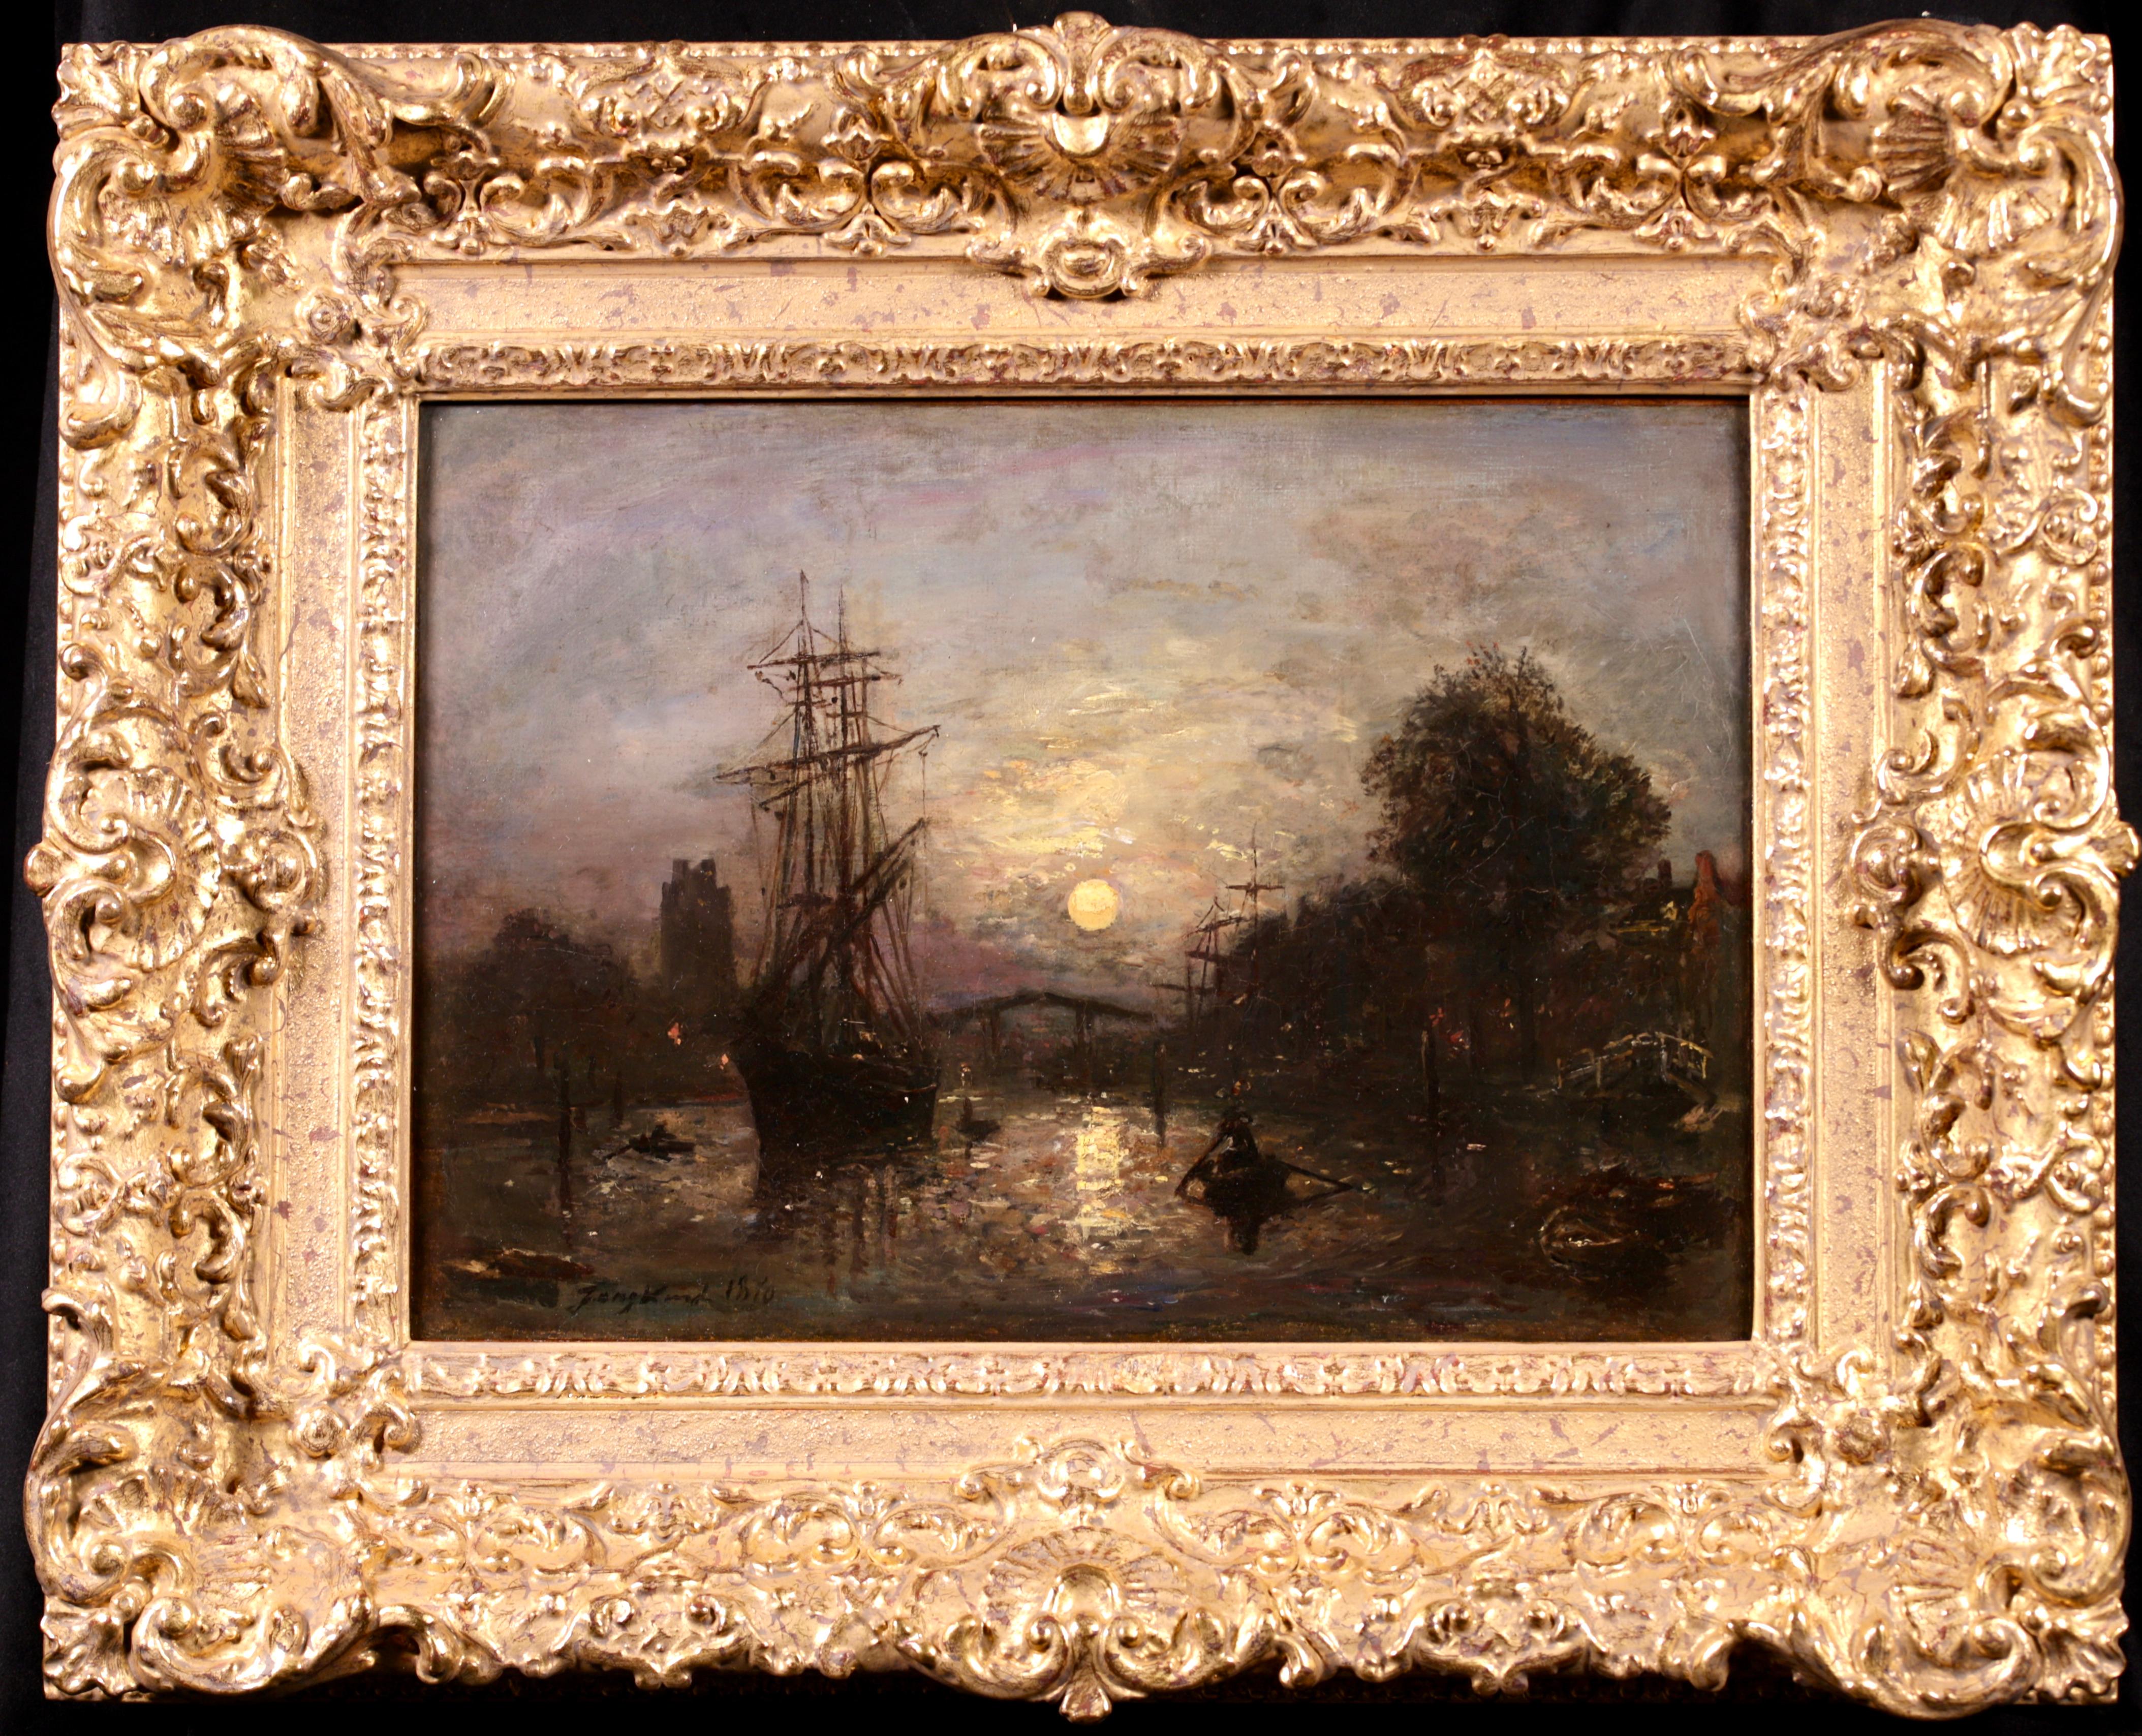 Signed and dated riverscape oil on canvas circa 1870 by Dutch impressionist painter Johan Barthold Jongkind. The work depicts boats sailing on the Dordrecht canal in the Netherlands. To the left the stands the tall shadowy outline of a sail boat and